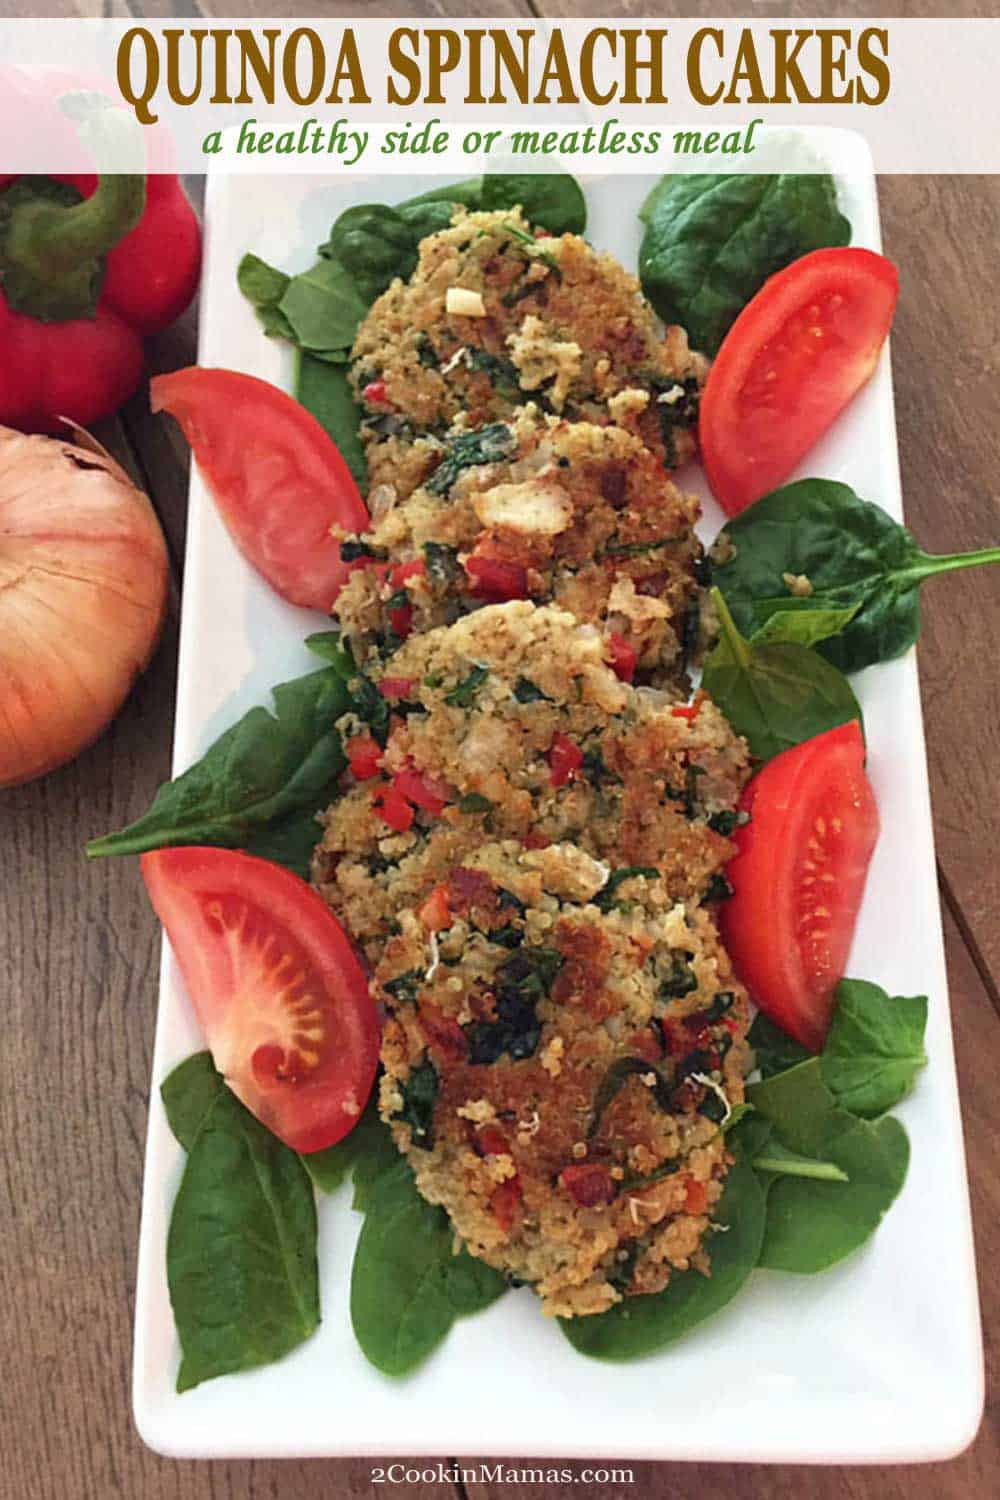 Quinoa Spinach Cakes | 2 Cookin Mamas Quinoa Spinach Cakes are quick & easy, perfect for busy weeknights. Combine protein-rich quinoa with spinach & spices for a healthy side or a hearty meatless meal. #meatlessmeal #quinoa #spinach #sidedish #30minutemeal #recipe 